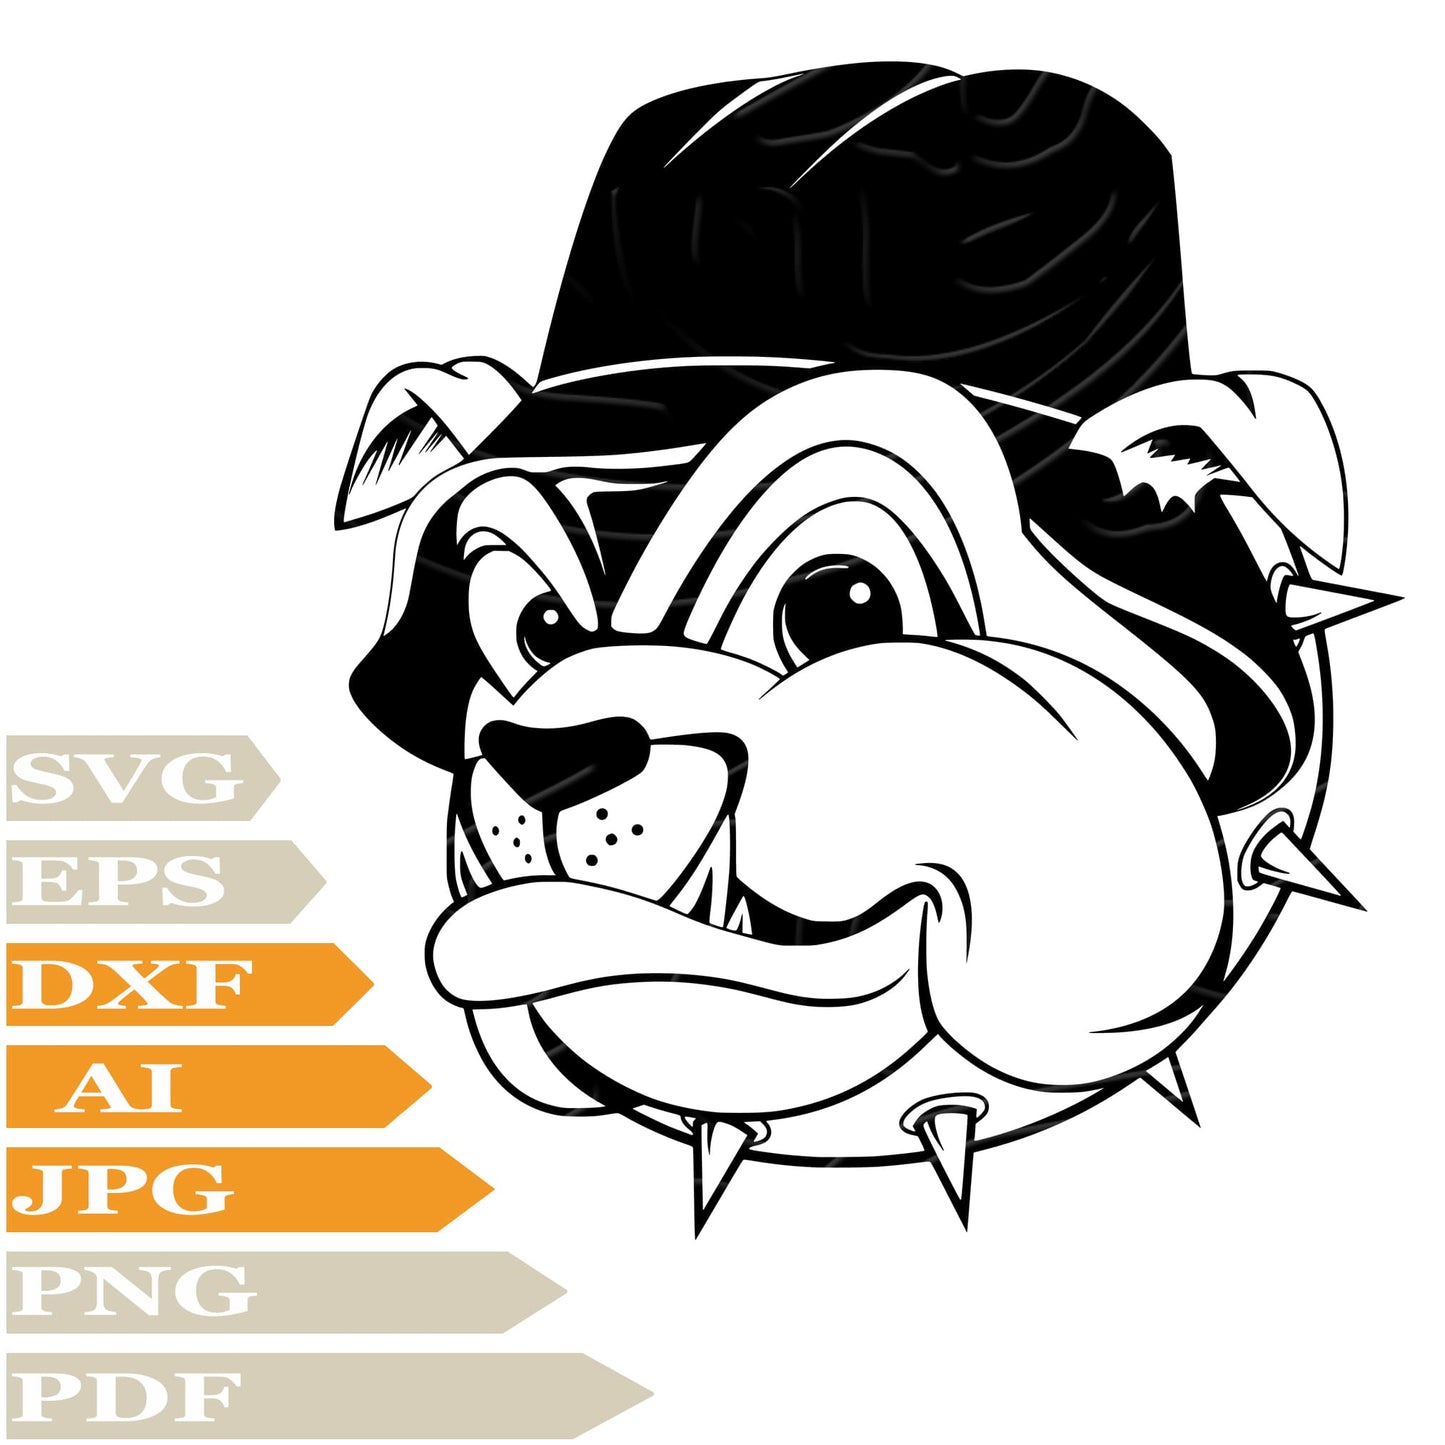 Bulldog SVG, Angry Bulldog SVG Design, Bulldog With Hat Vector Graphics, For Cricut, For Tattoo, Clip Art, Cut File, T-Shirts, Silhouette, All Available